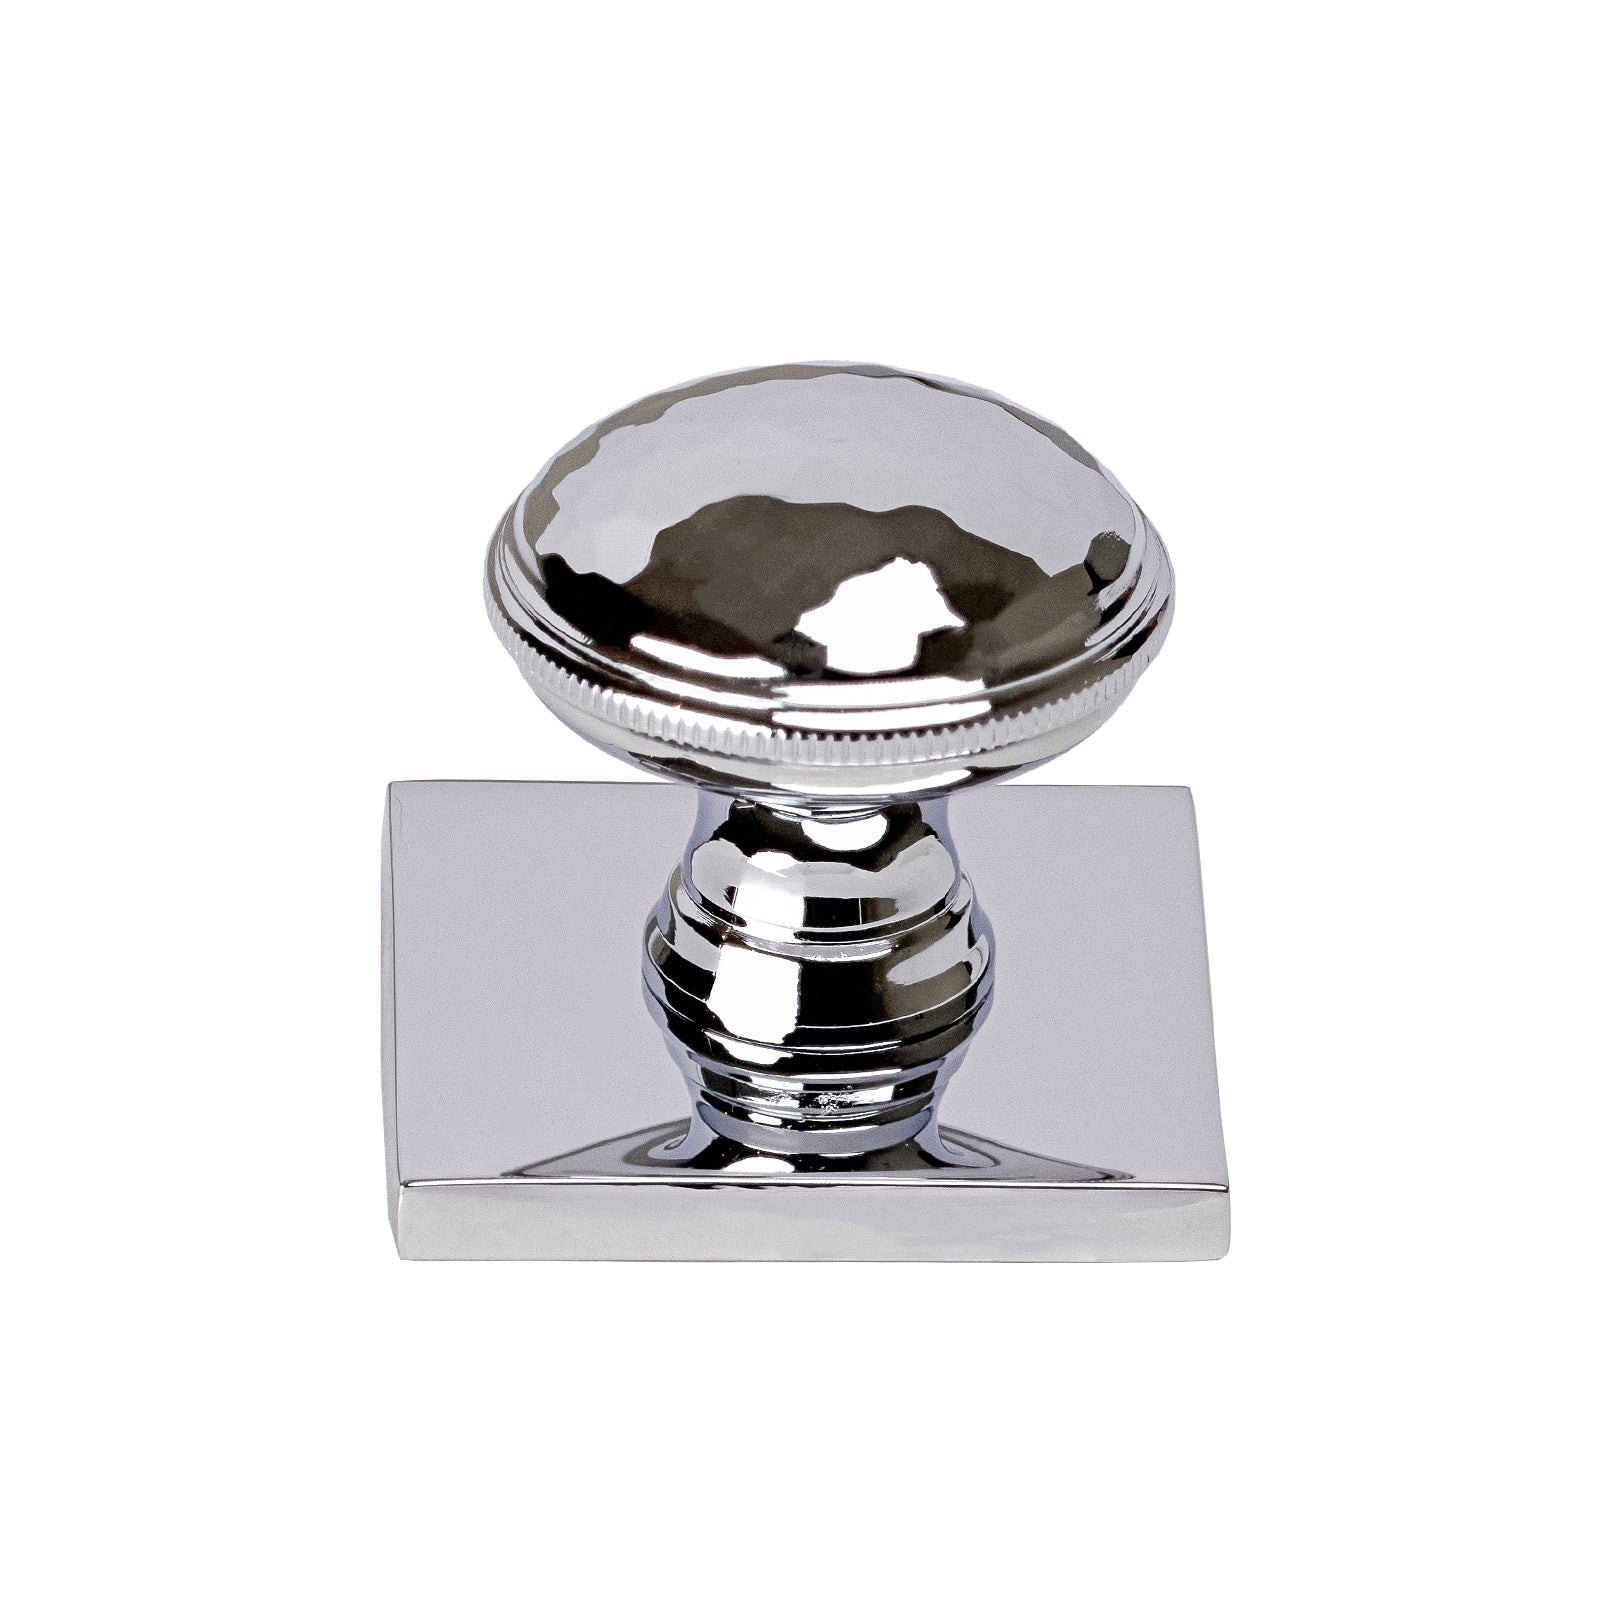 chrome beaten cabinet knobs on square backplate SHOW